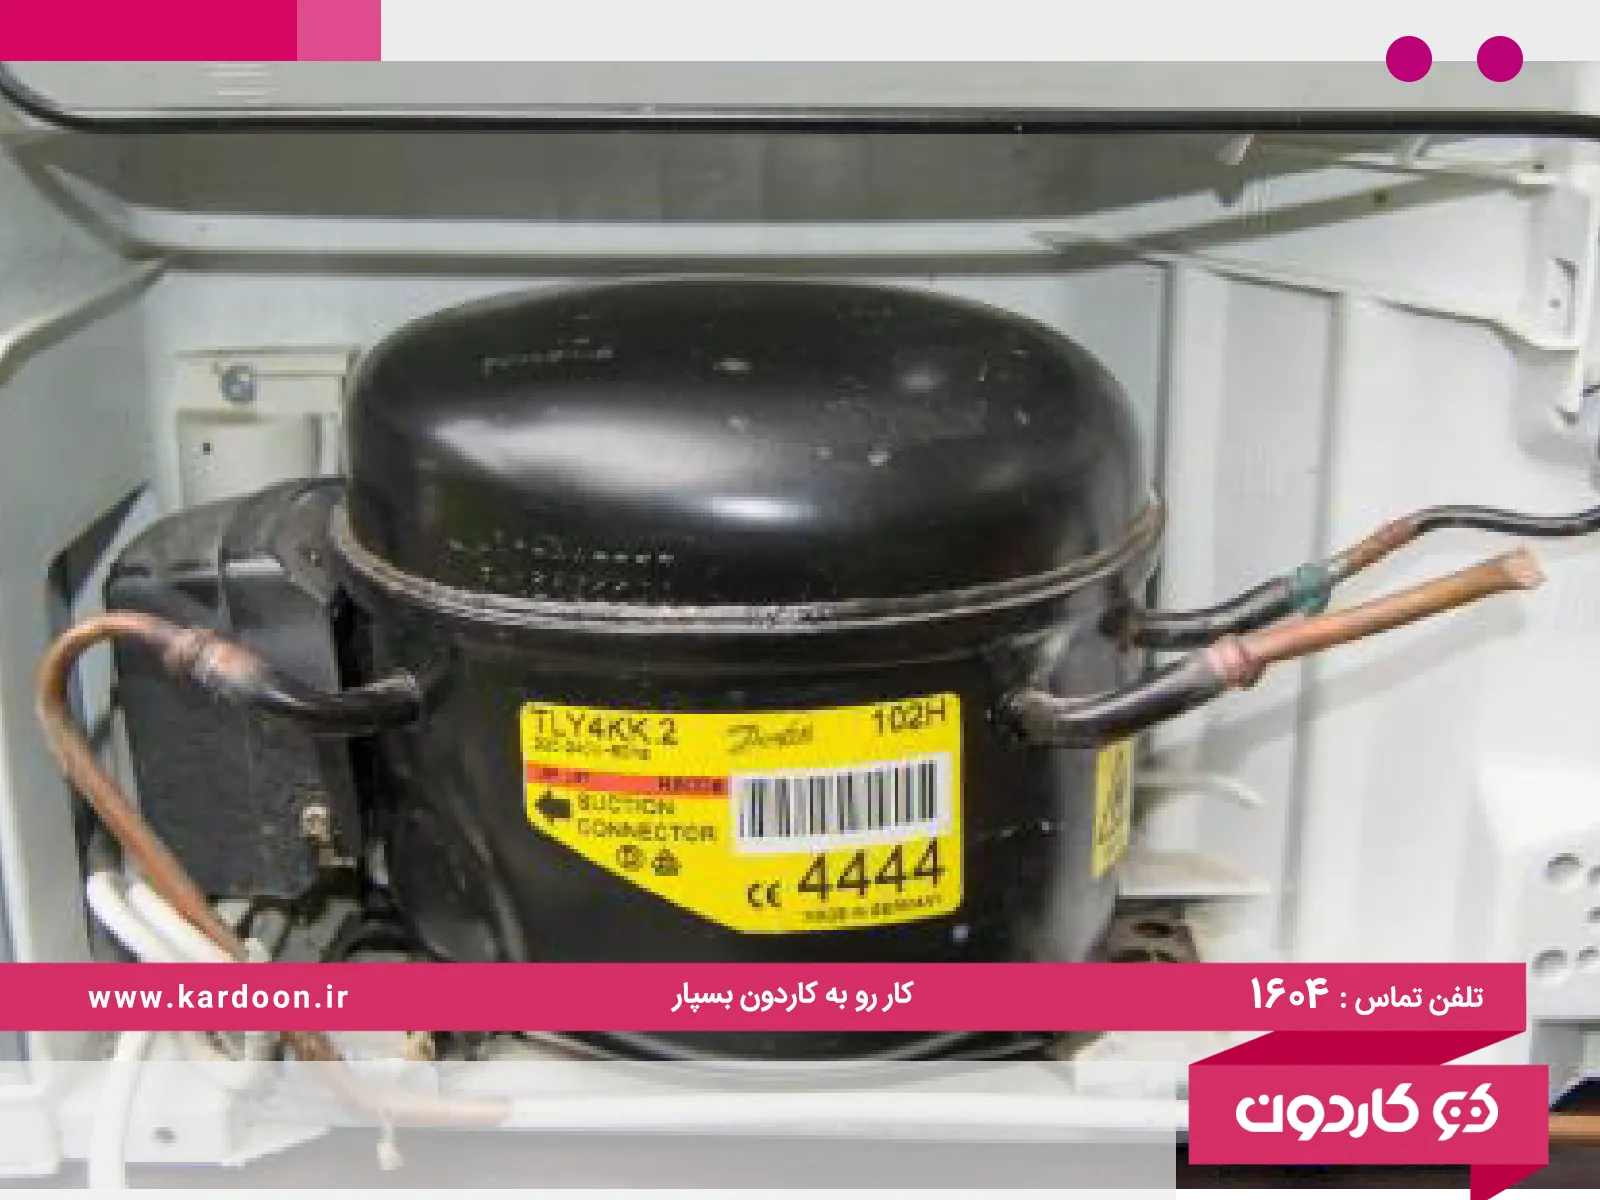 What is the cause of refrigerator engine oiling